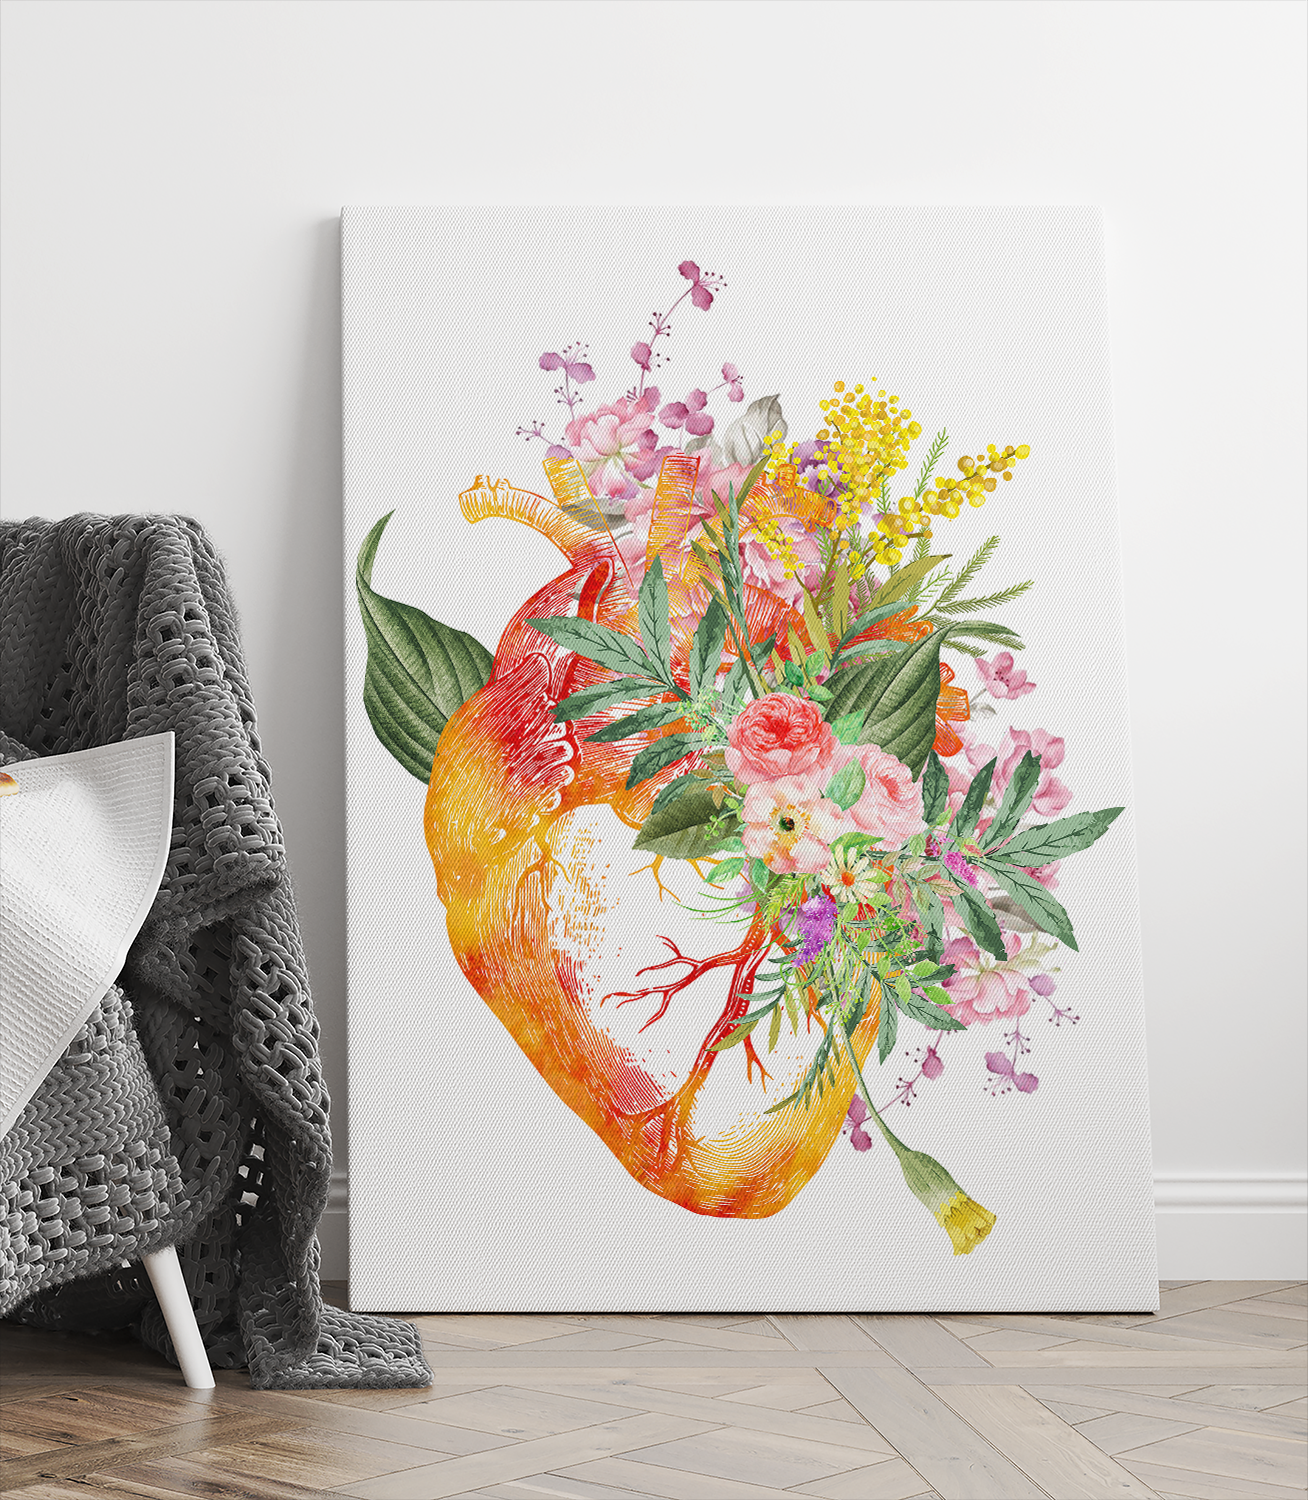 Anatomical Heart With Flowers, Floral Heart Canvas Prints